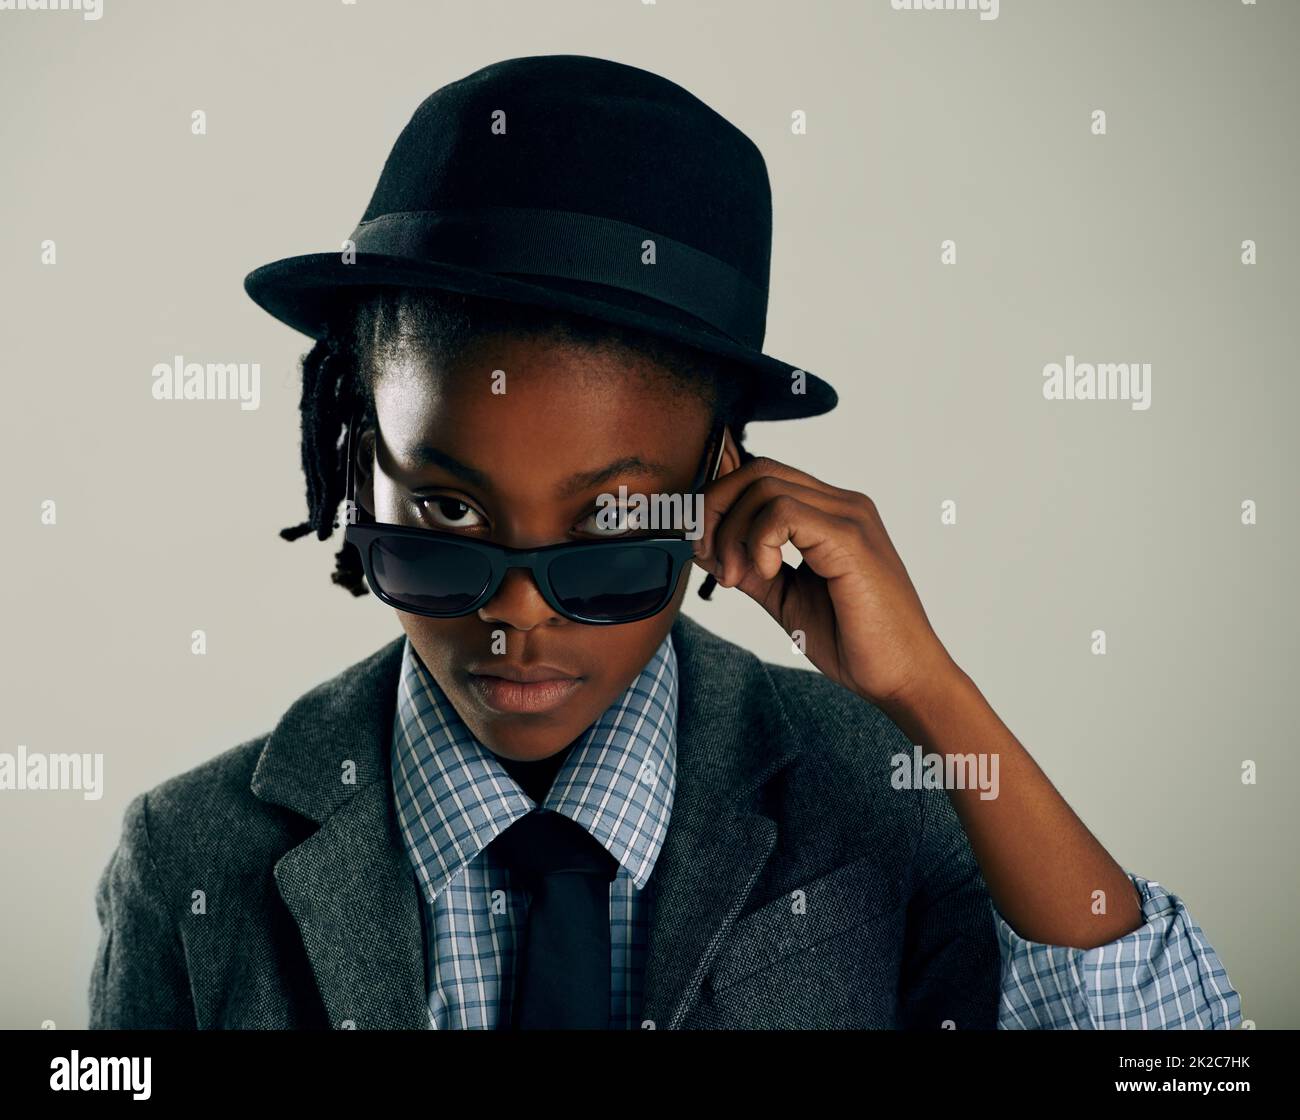 Dressed in his best. Studio shot of a cool ethnic boy peering over his sunglasses. Stock Photo